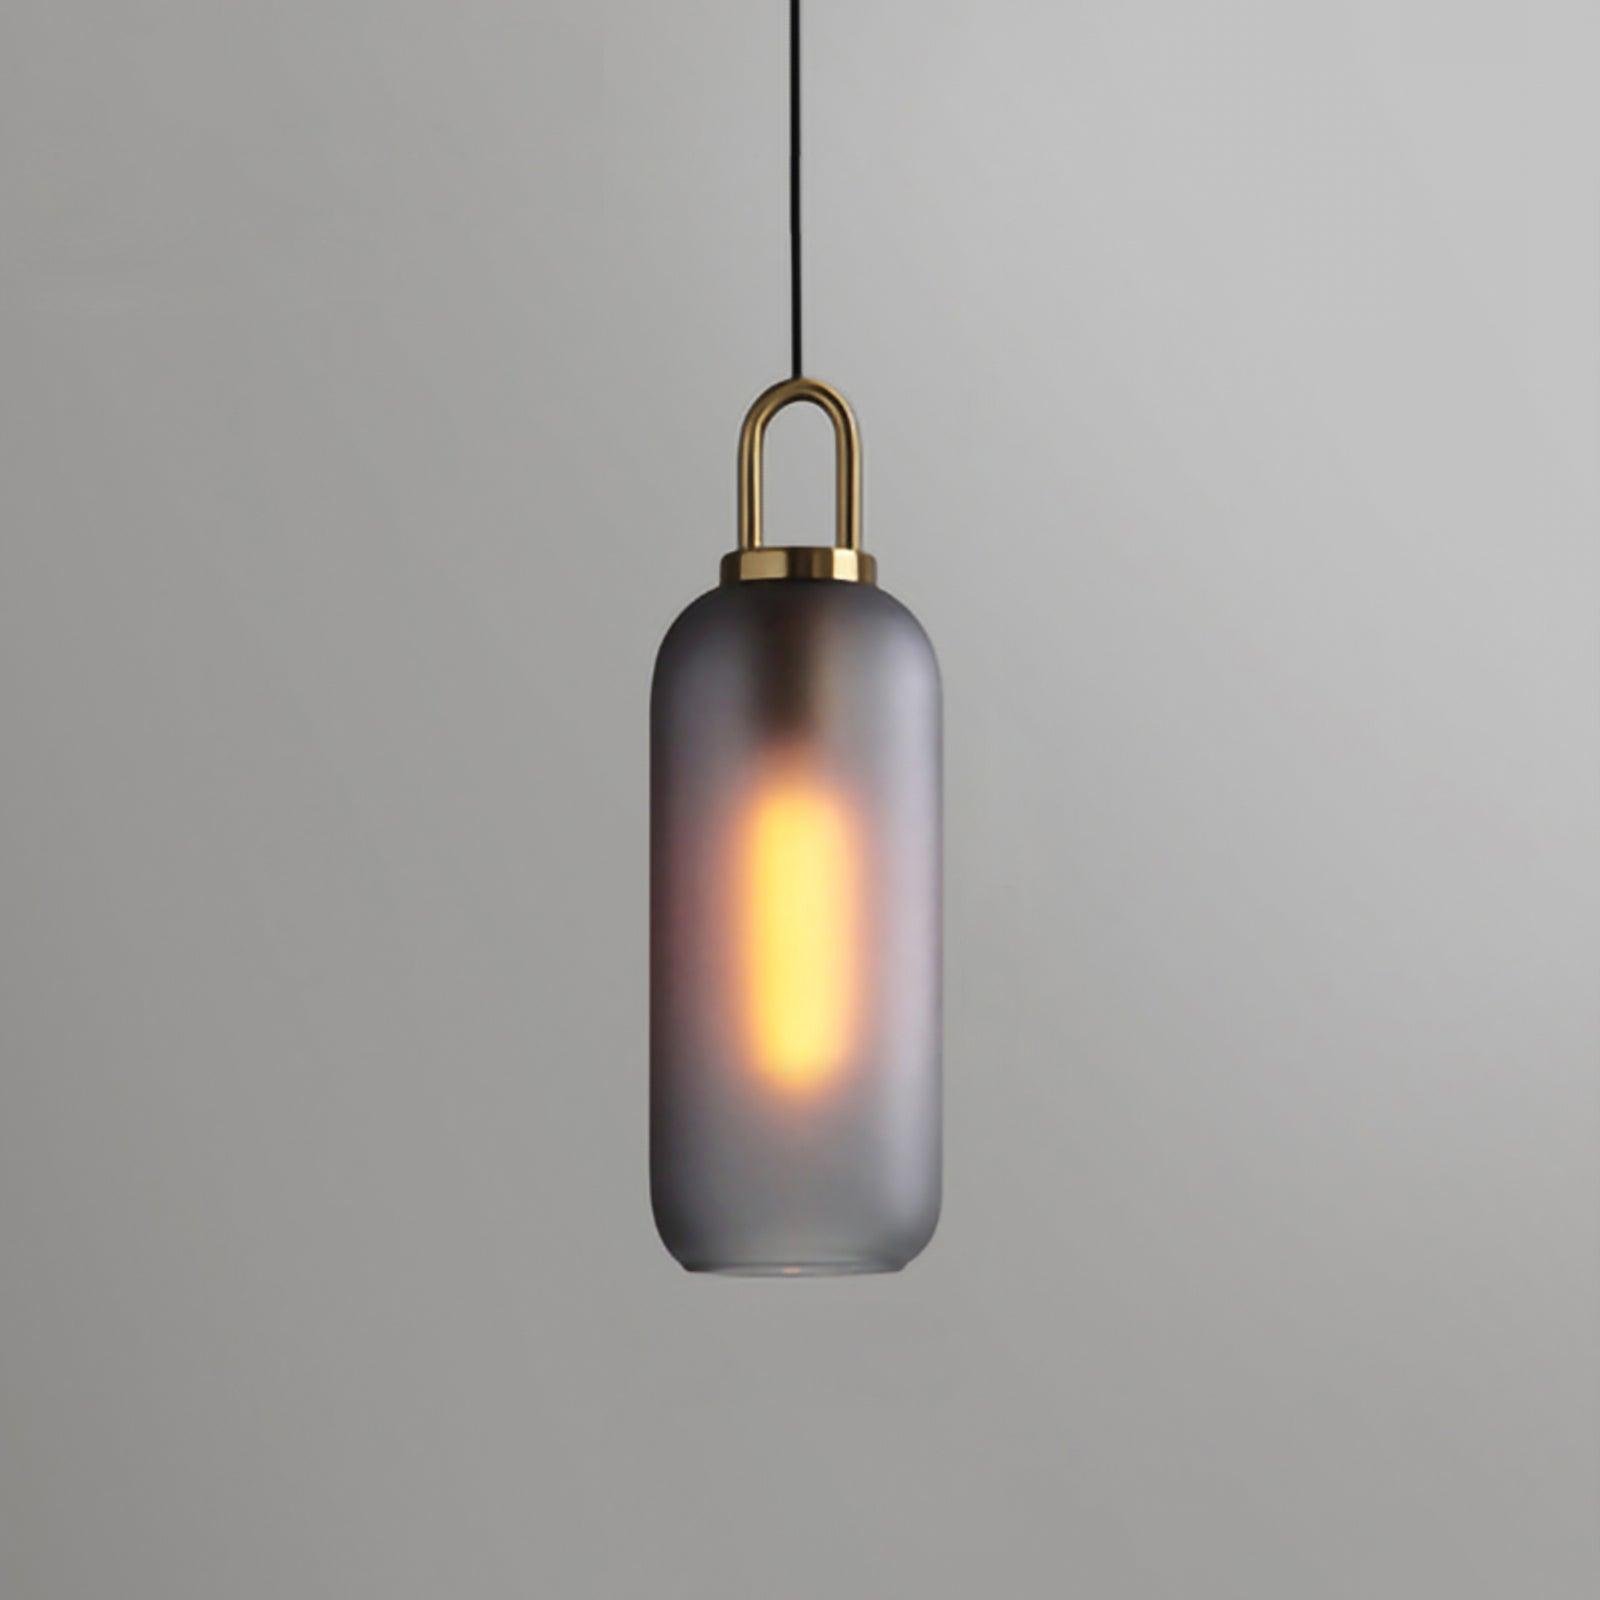 Frosted Glass Pendant Light with a Diameter of 5.1 inches and Height of 15.7 inches, or 13cm x 40cm